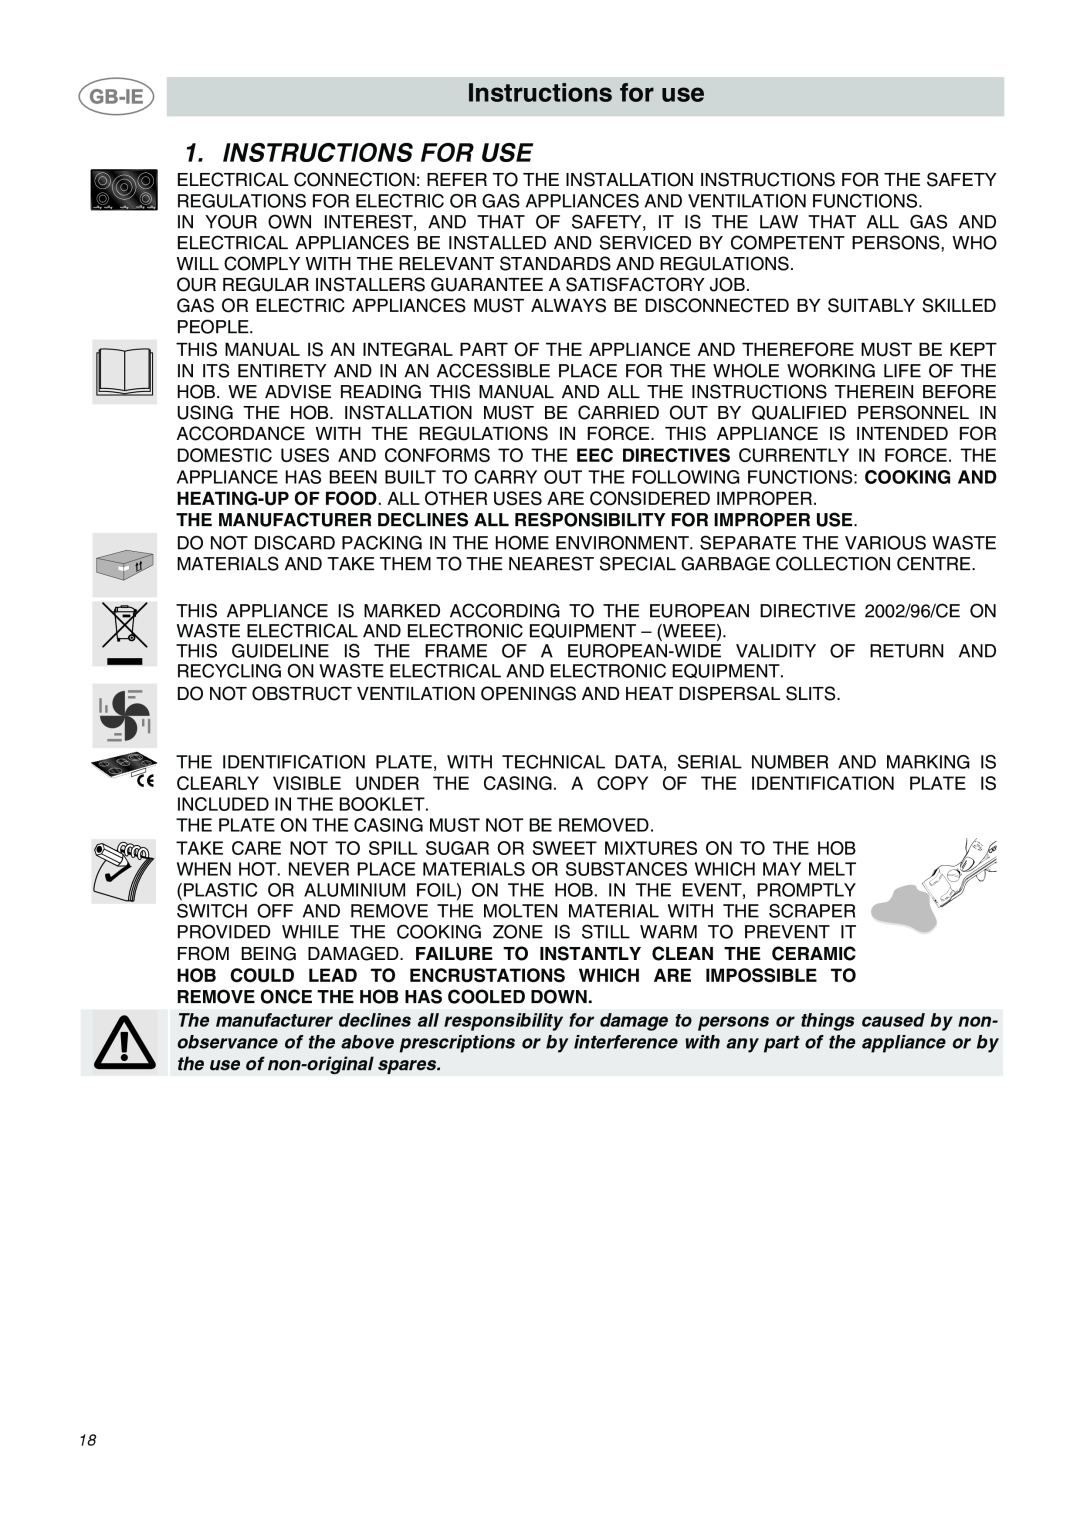 Smeg SE2320ID1 Instructions for use, Instructions For Use, The Manufacturer Declines All Responsibility For Improper Use 